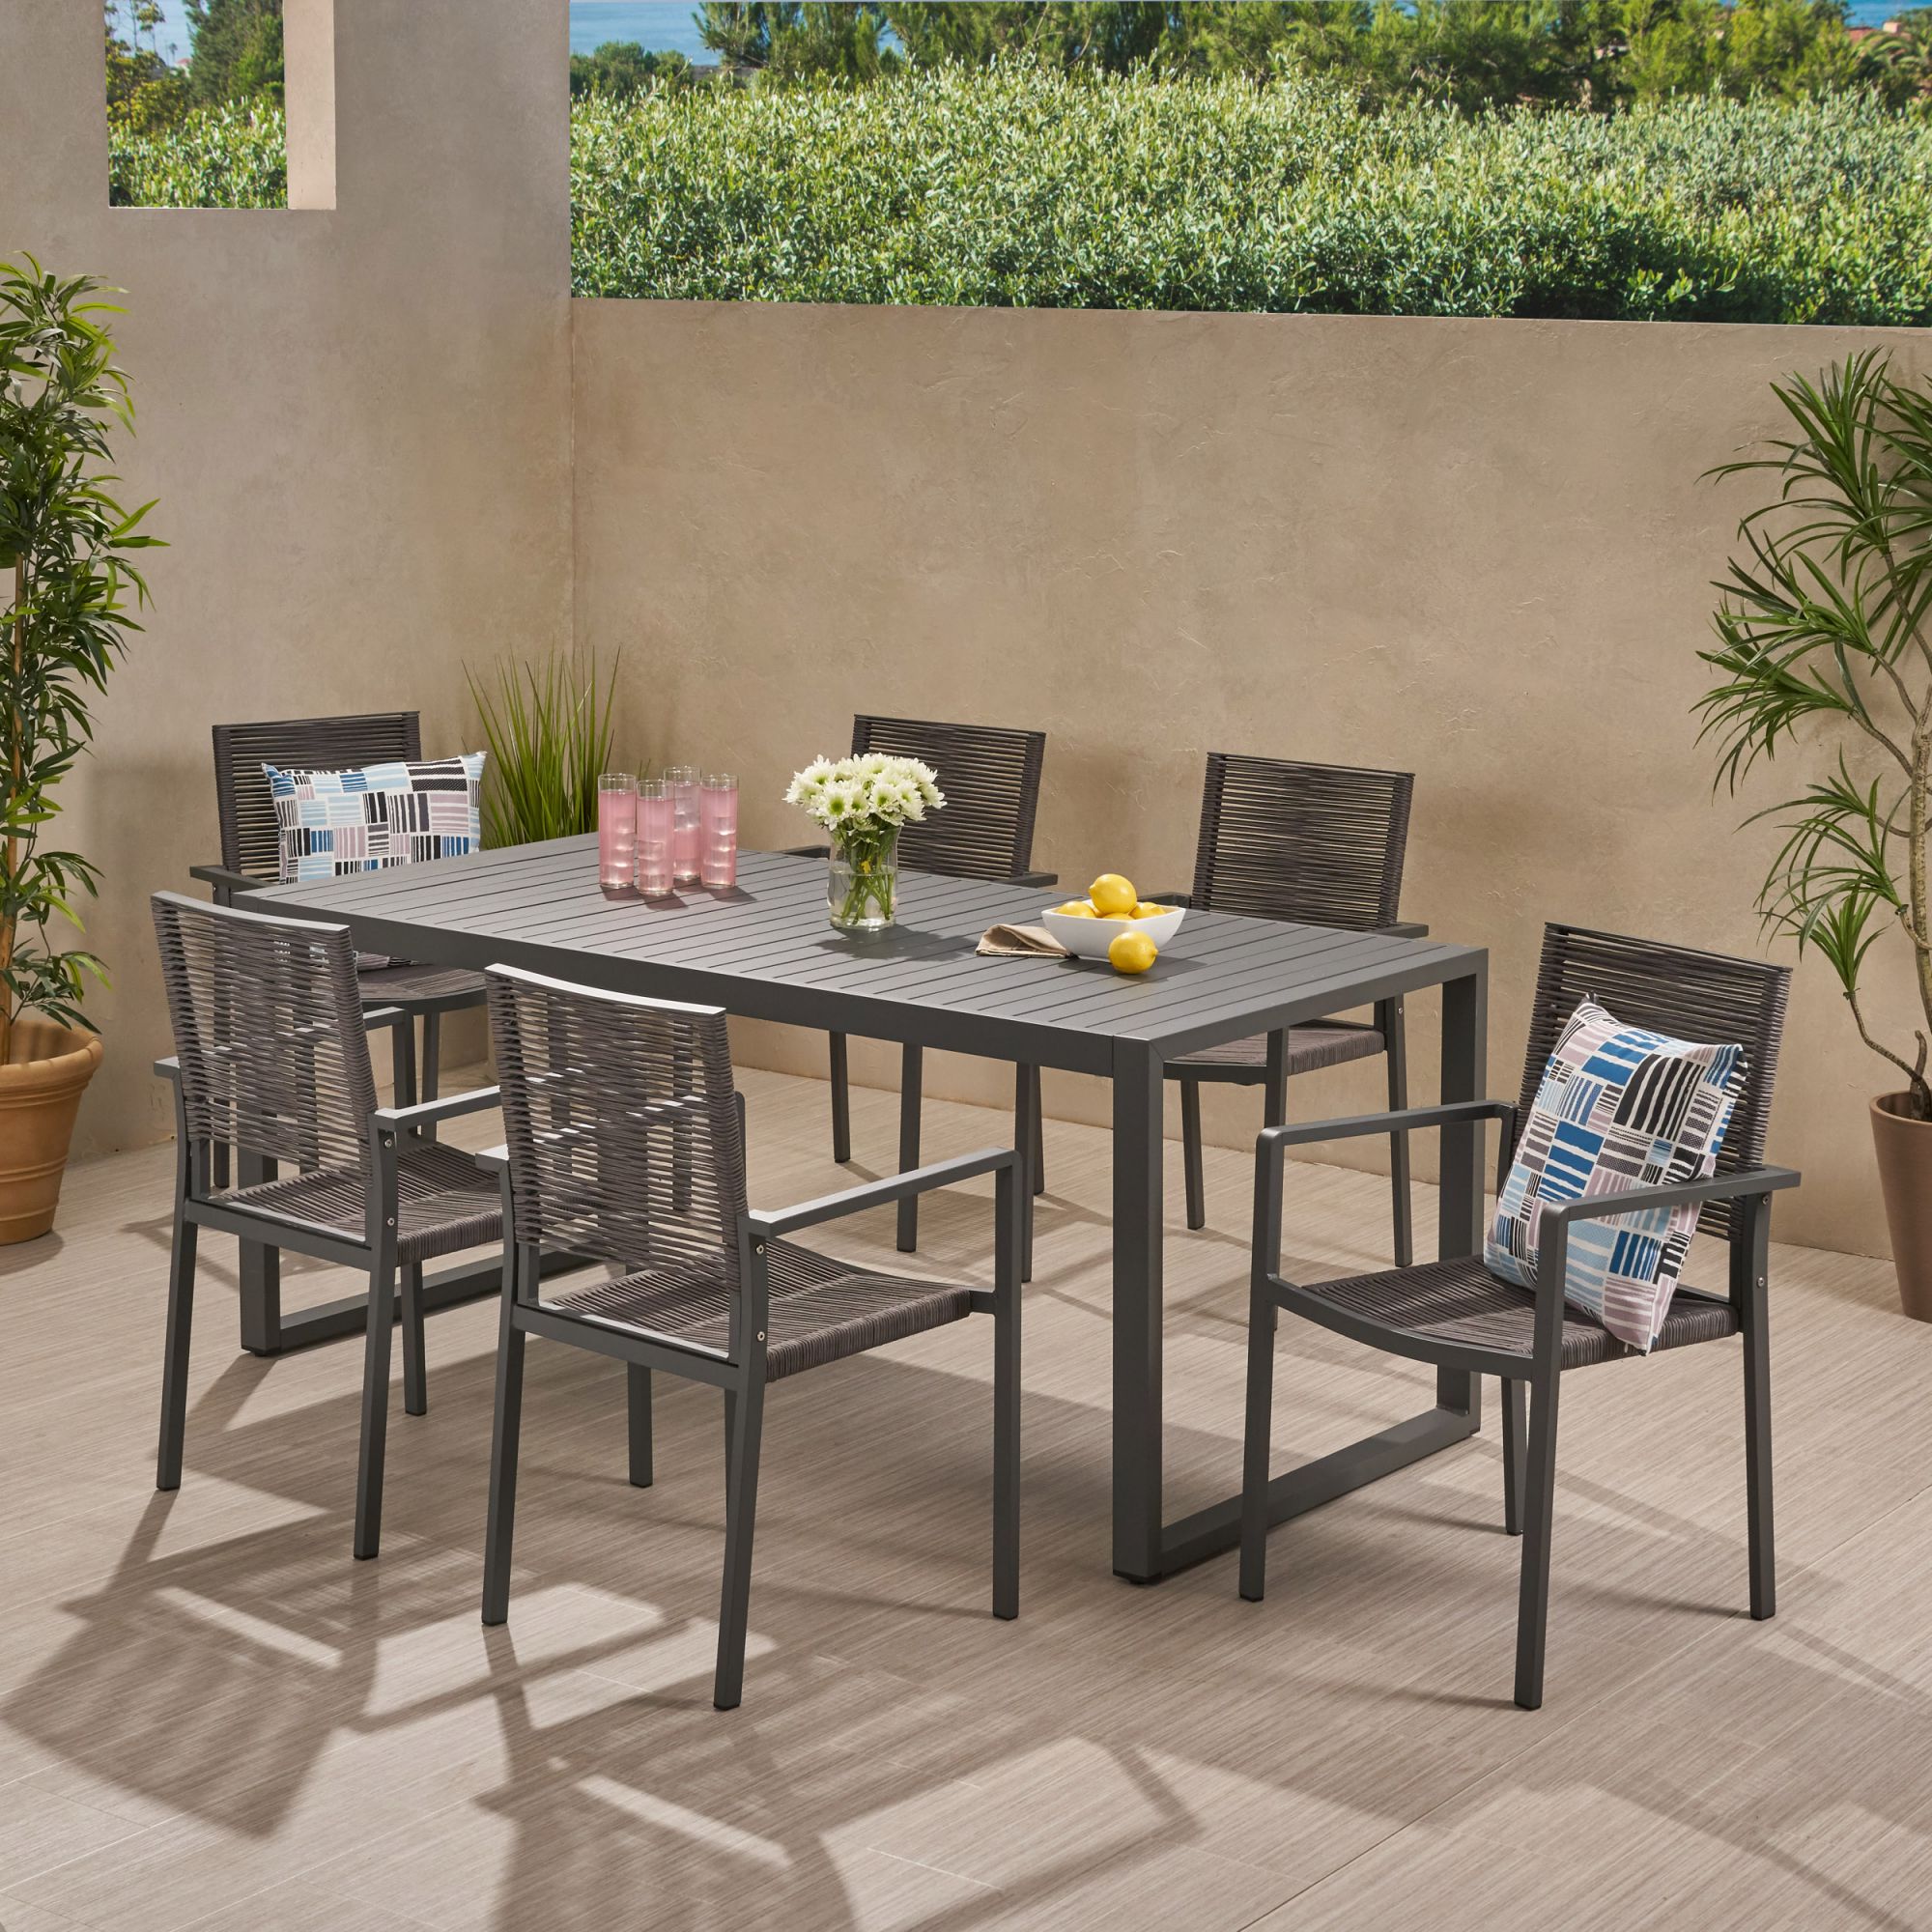 Blan Outdoor 6 Seater Aluminum Dining Set, Gray and Dark Gray by Noble ...